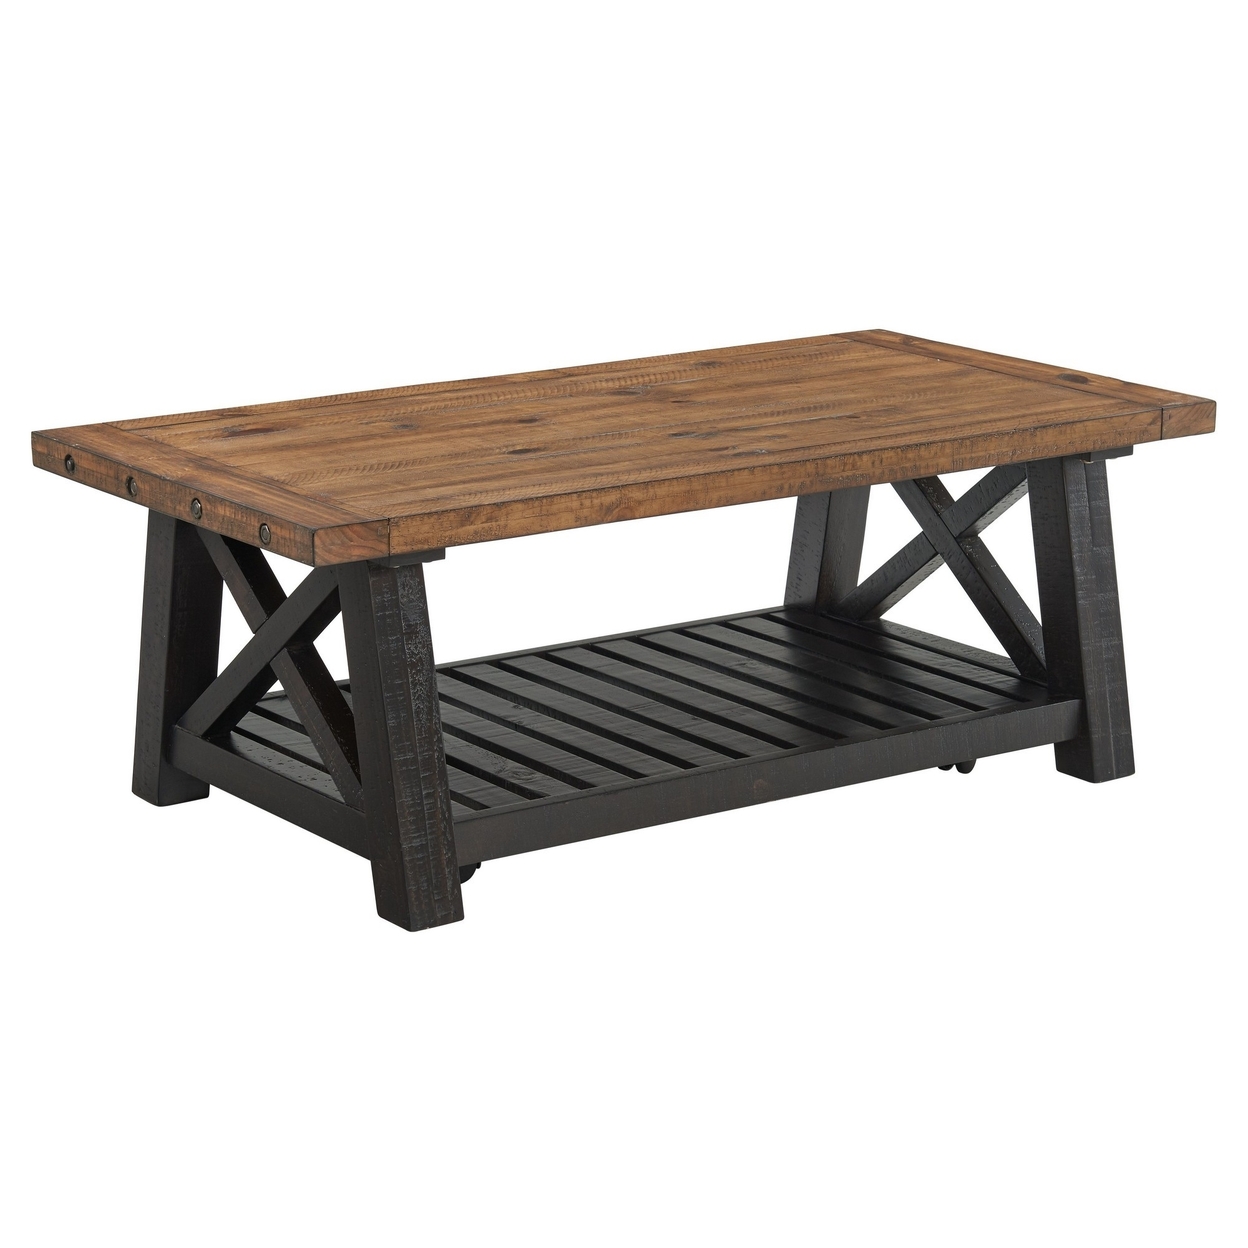 Coffee Table With Slatted Shelf And X Legs, Brown And Black- Saltoro Sherpi